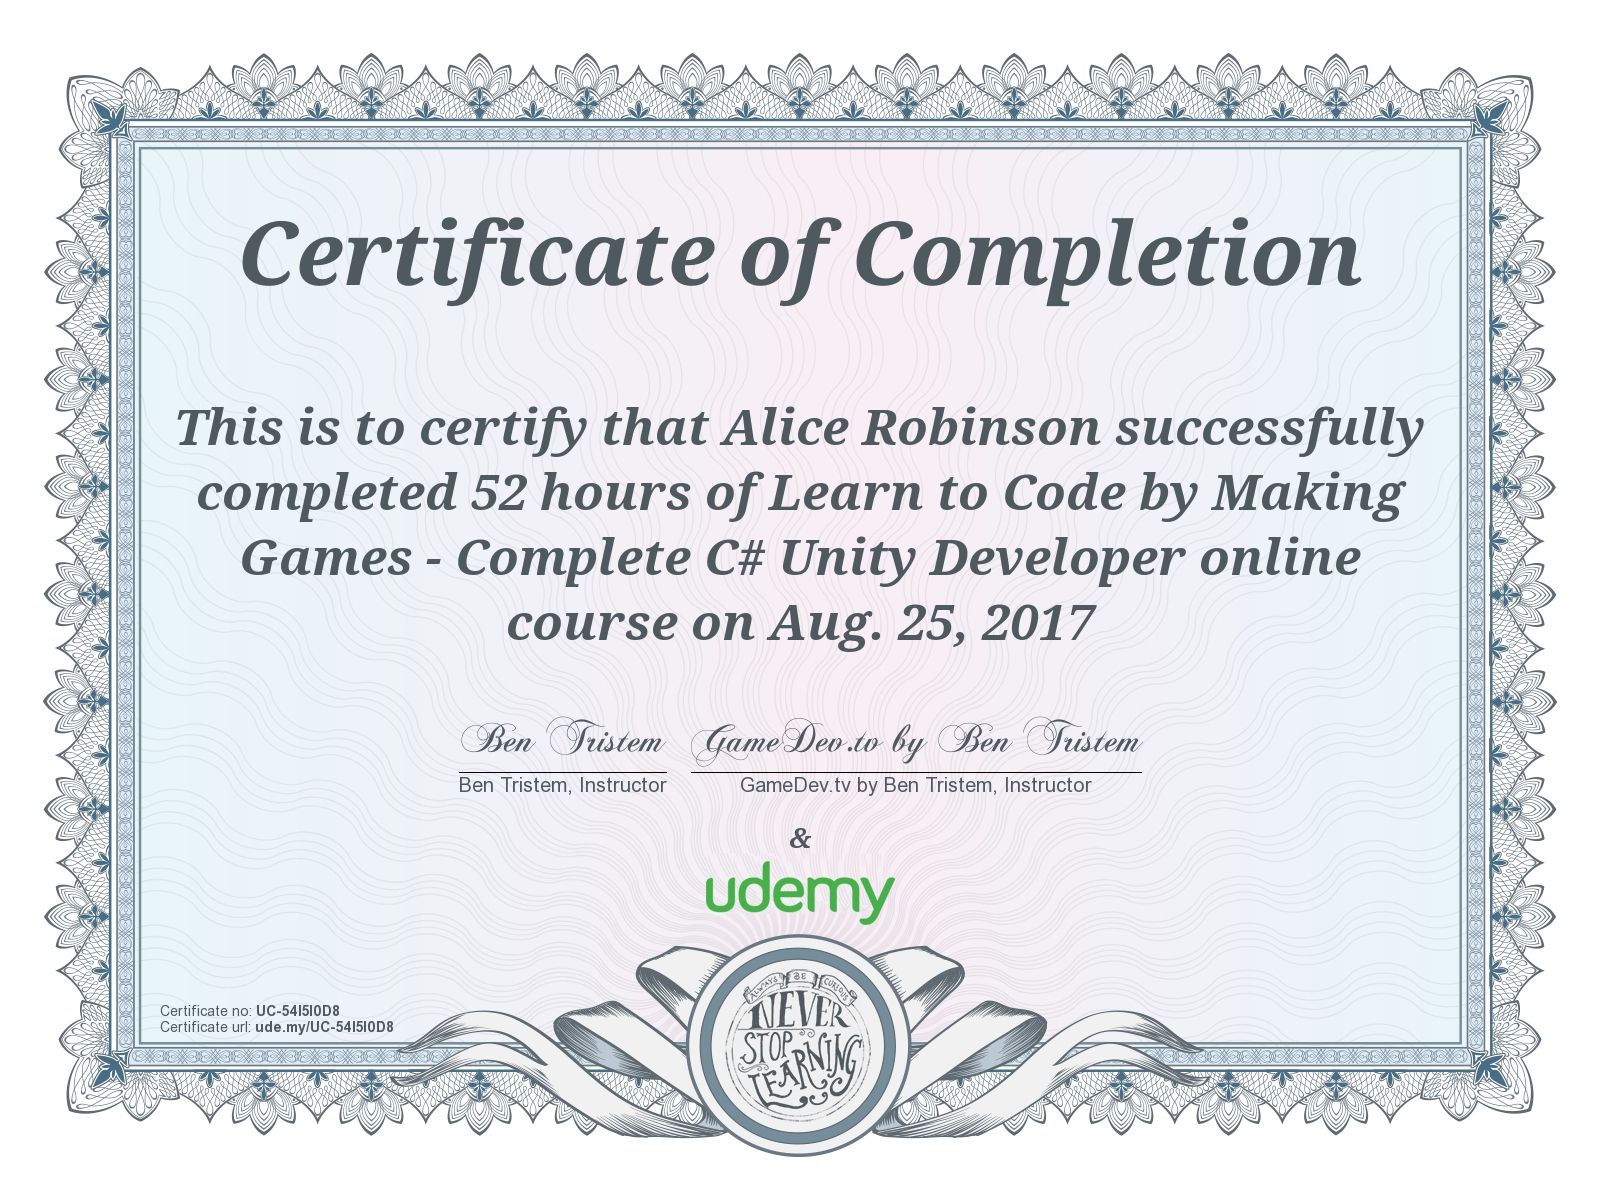 Completed! UnityCourse - Game Dev Weekly - 8/19 - 8/25